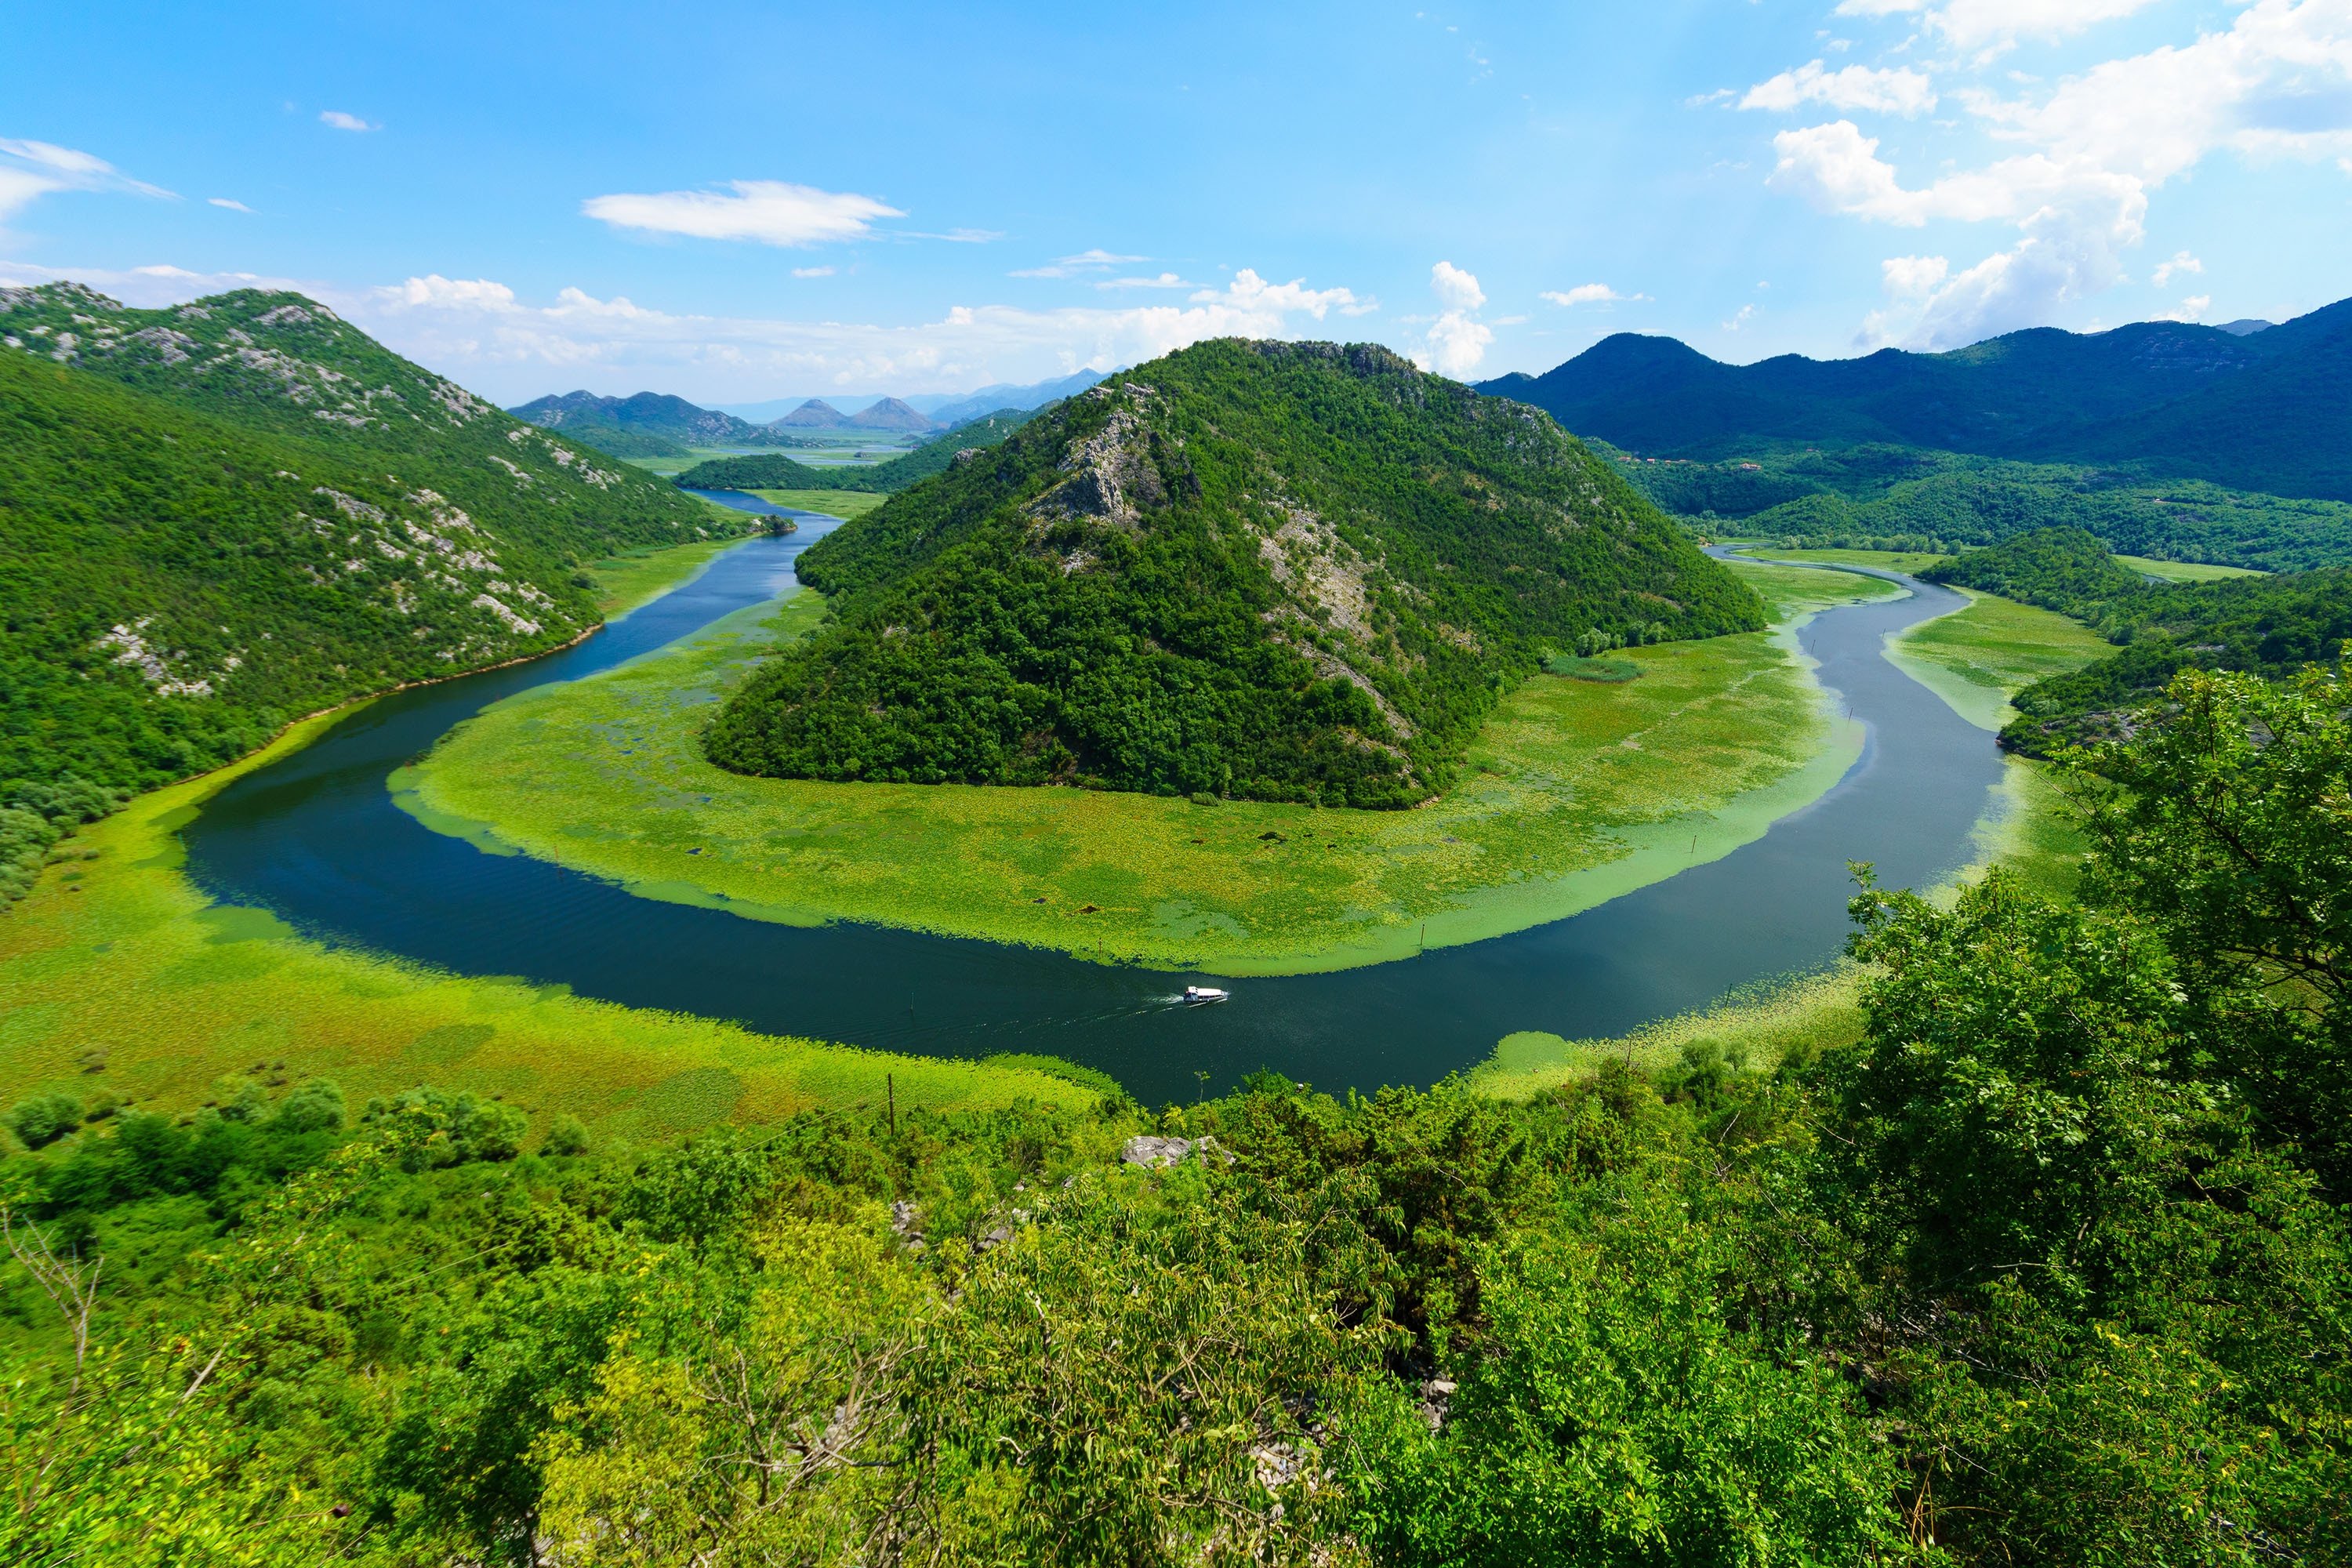 Rijeka Crnojevica River bends around Green Pyramid hill in the northern area of Skadar Lake National Park, Montenegro. (Shutterstock Photo)